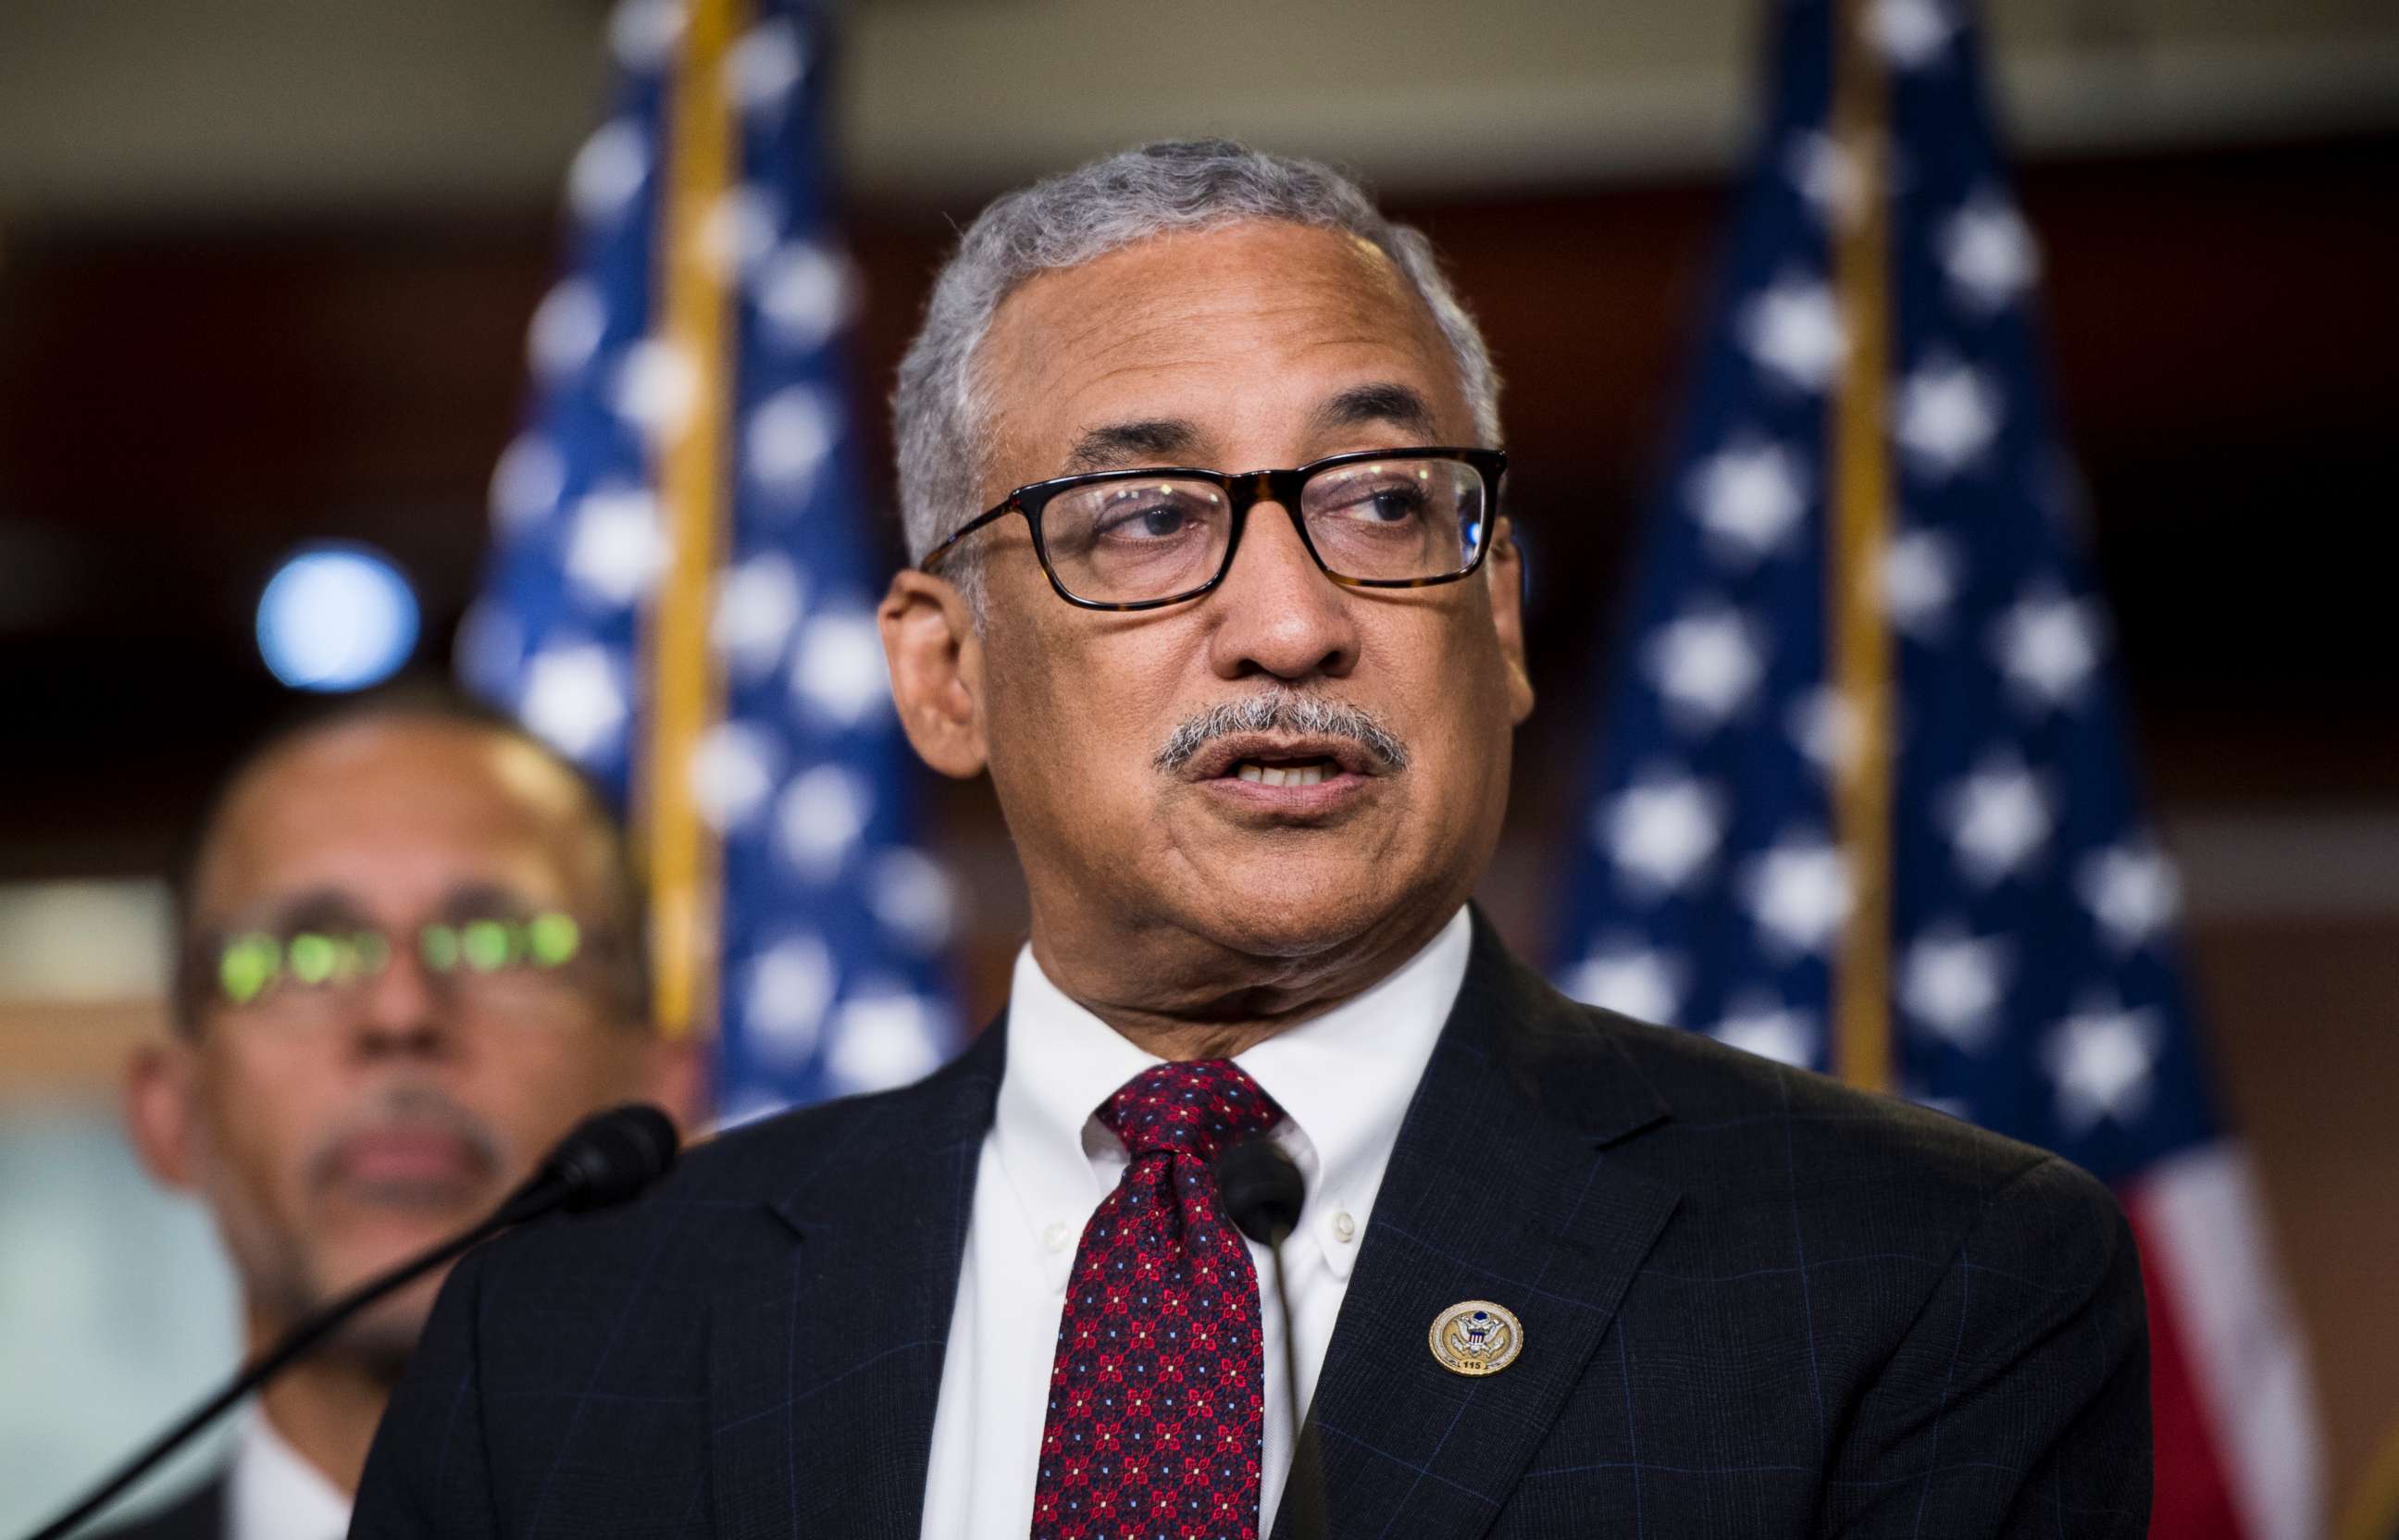 PHOTO: Rep. Bobby Scott speaks during the House Democrats news conference in the Capitol in Washington, July 24, 2018.